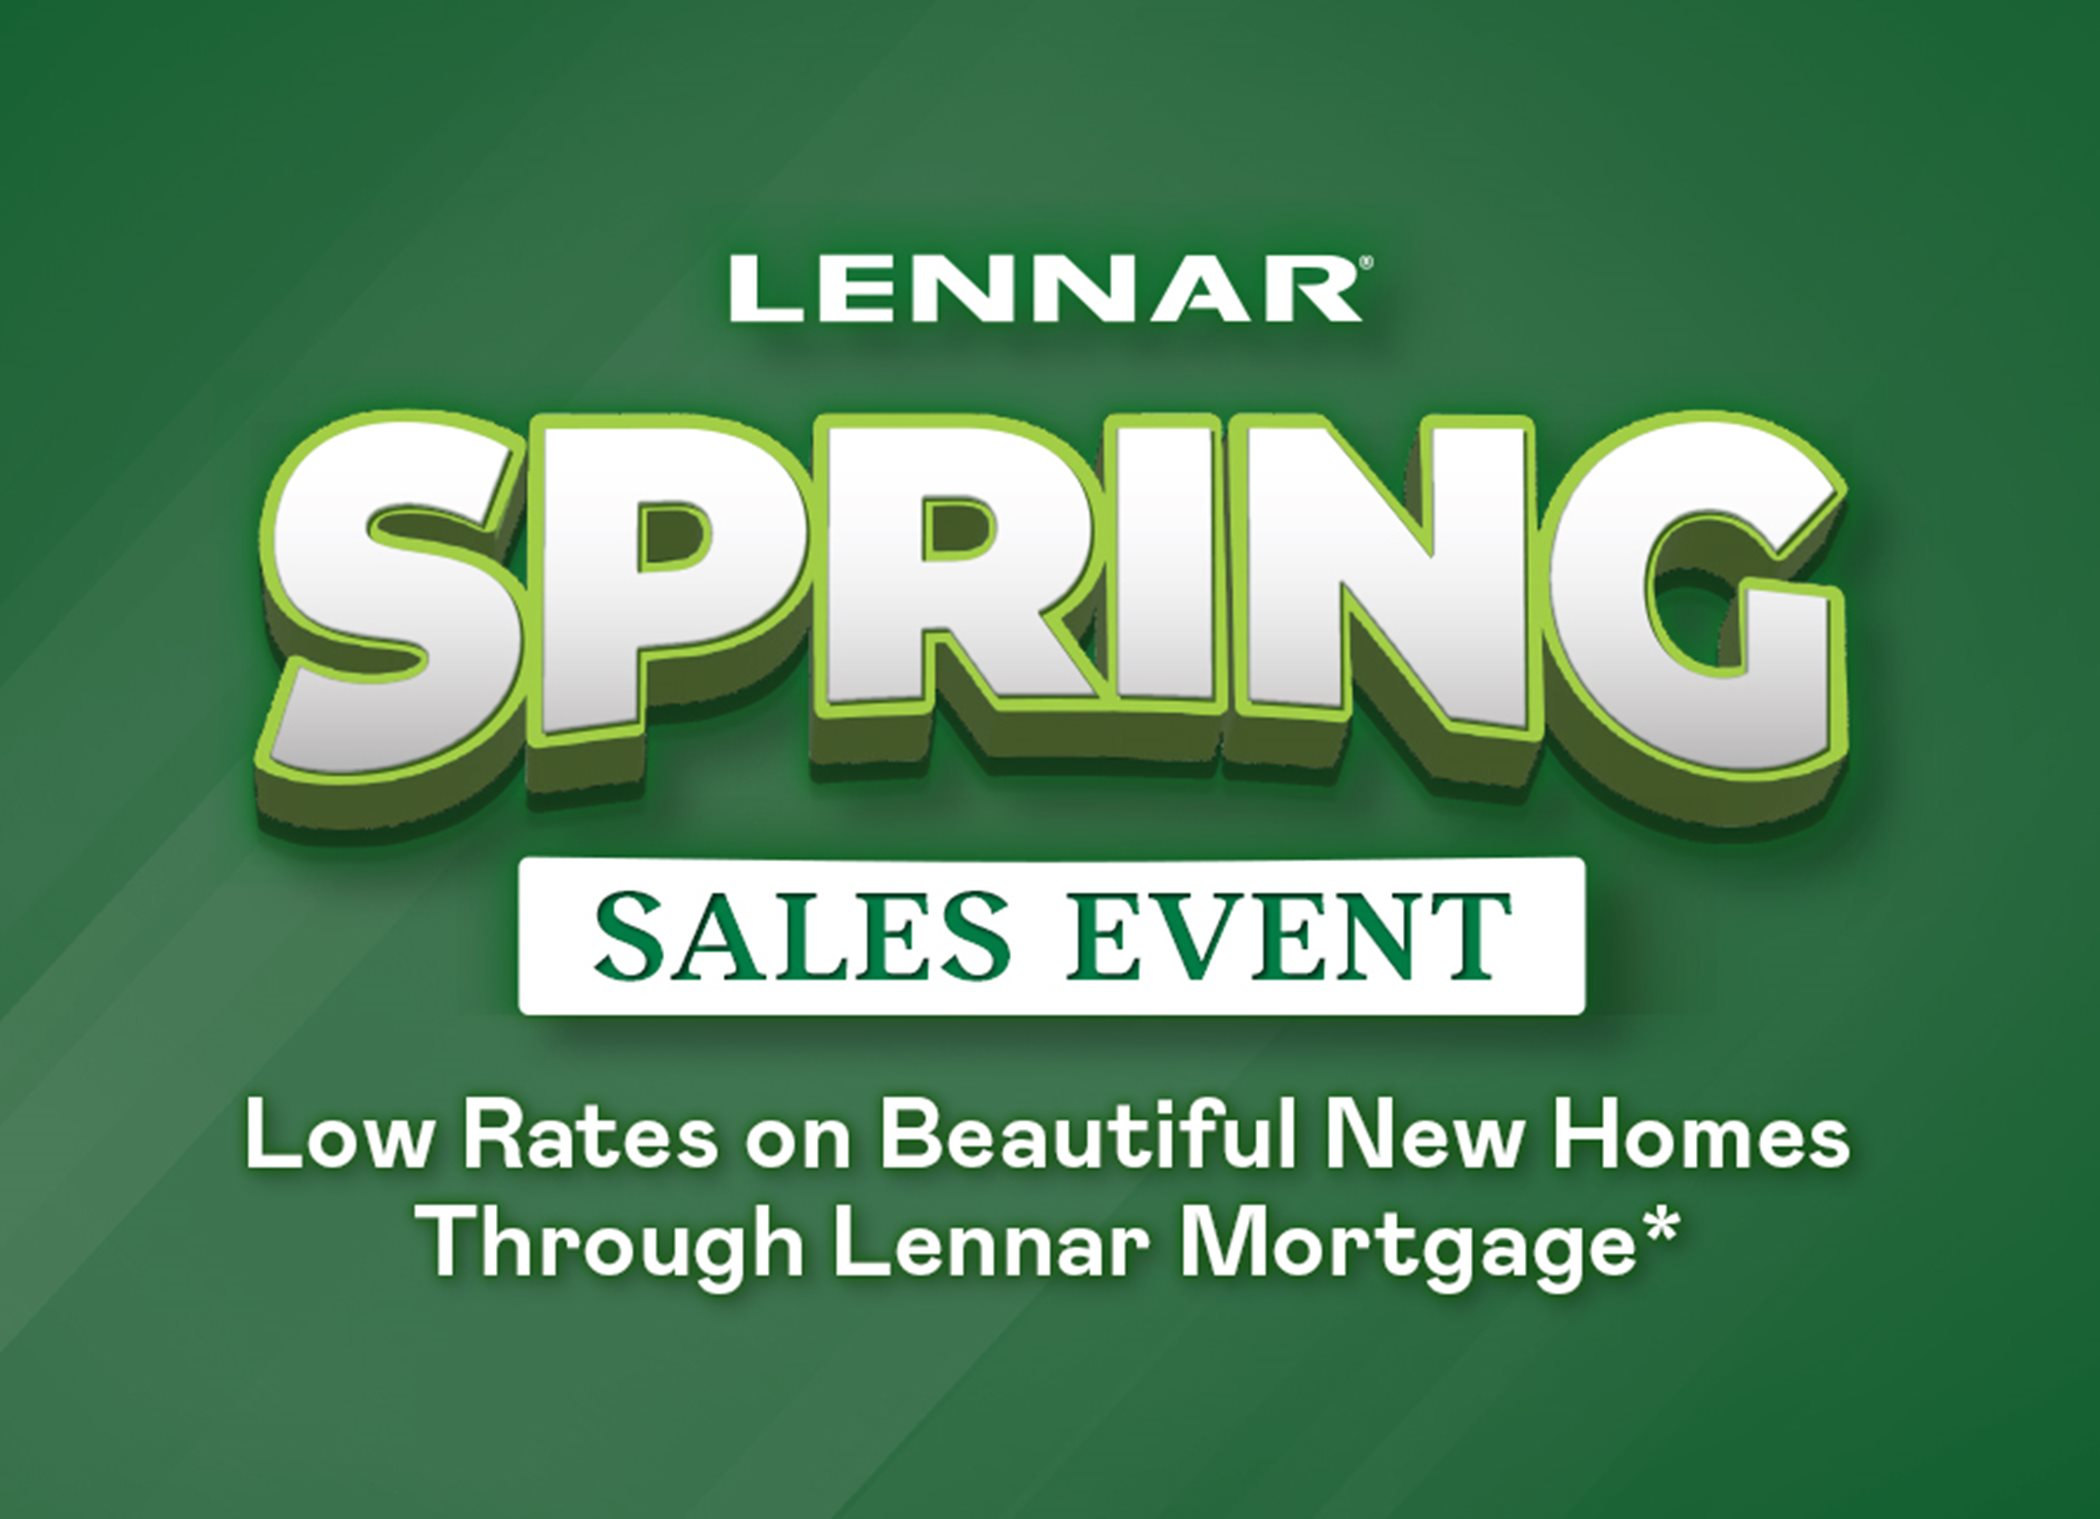 Lennar Spring Sales Event, Low Rates on Beautiful New Homes Through Lennar Mortgage*